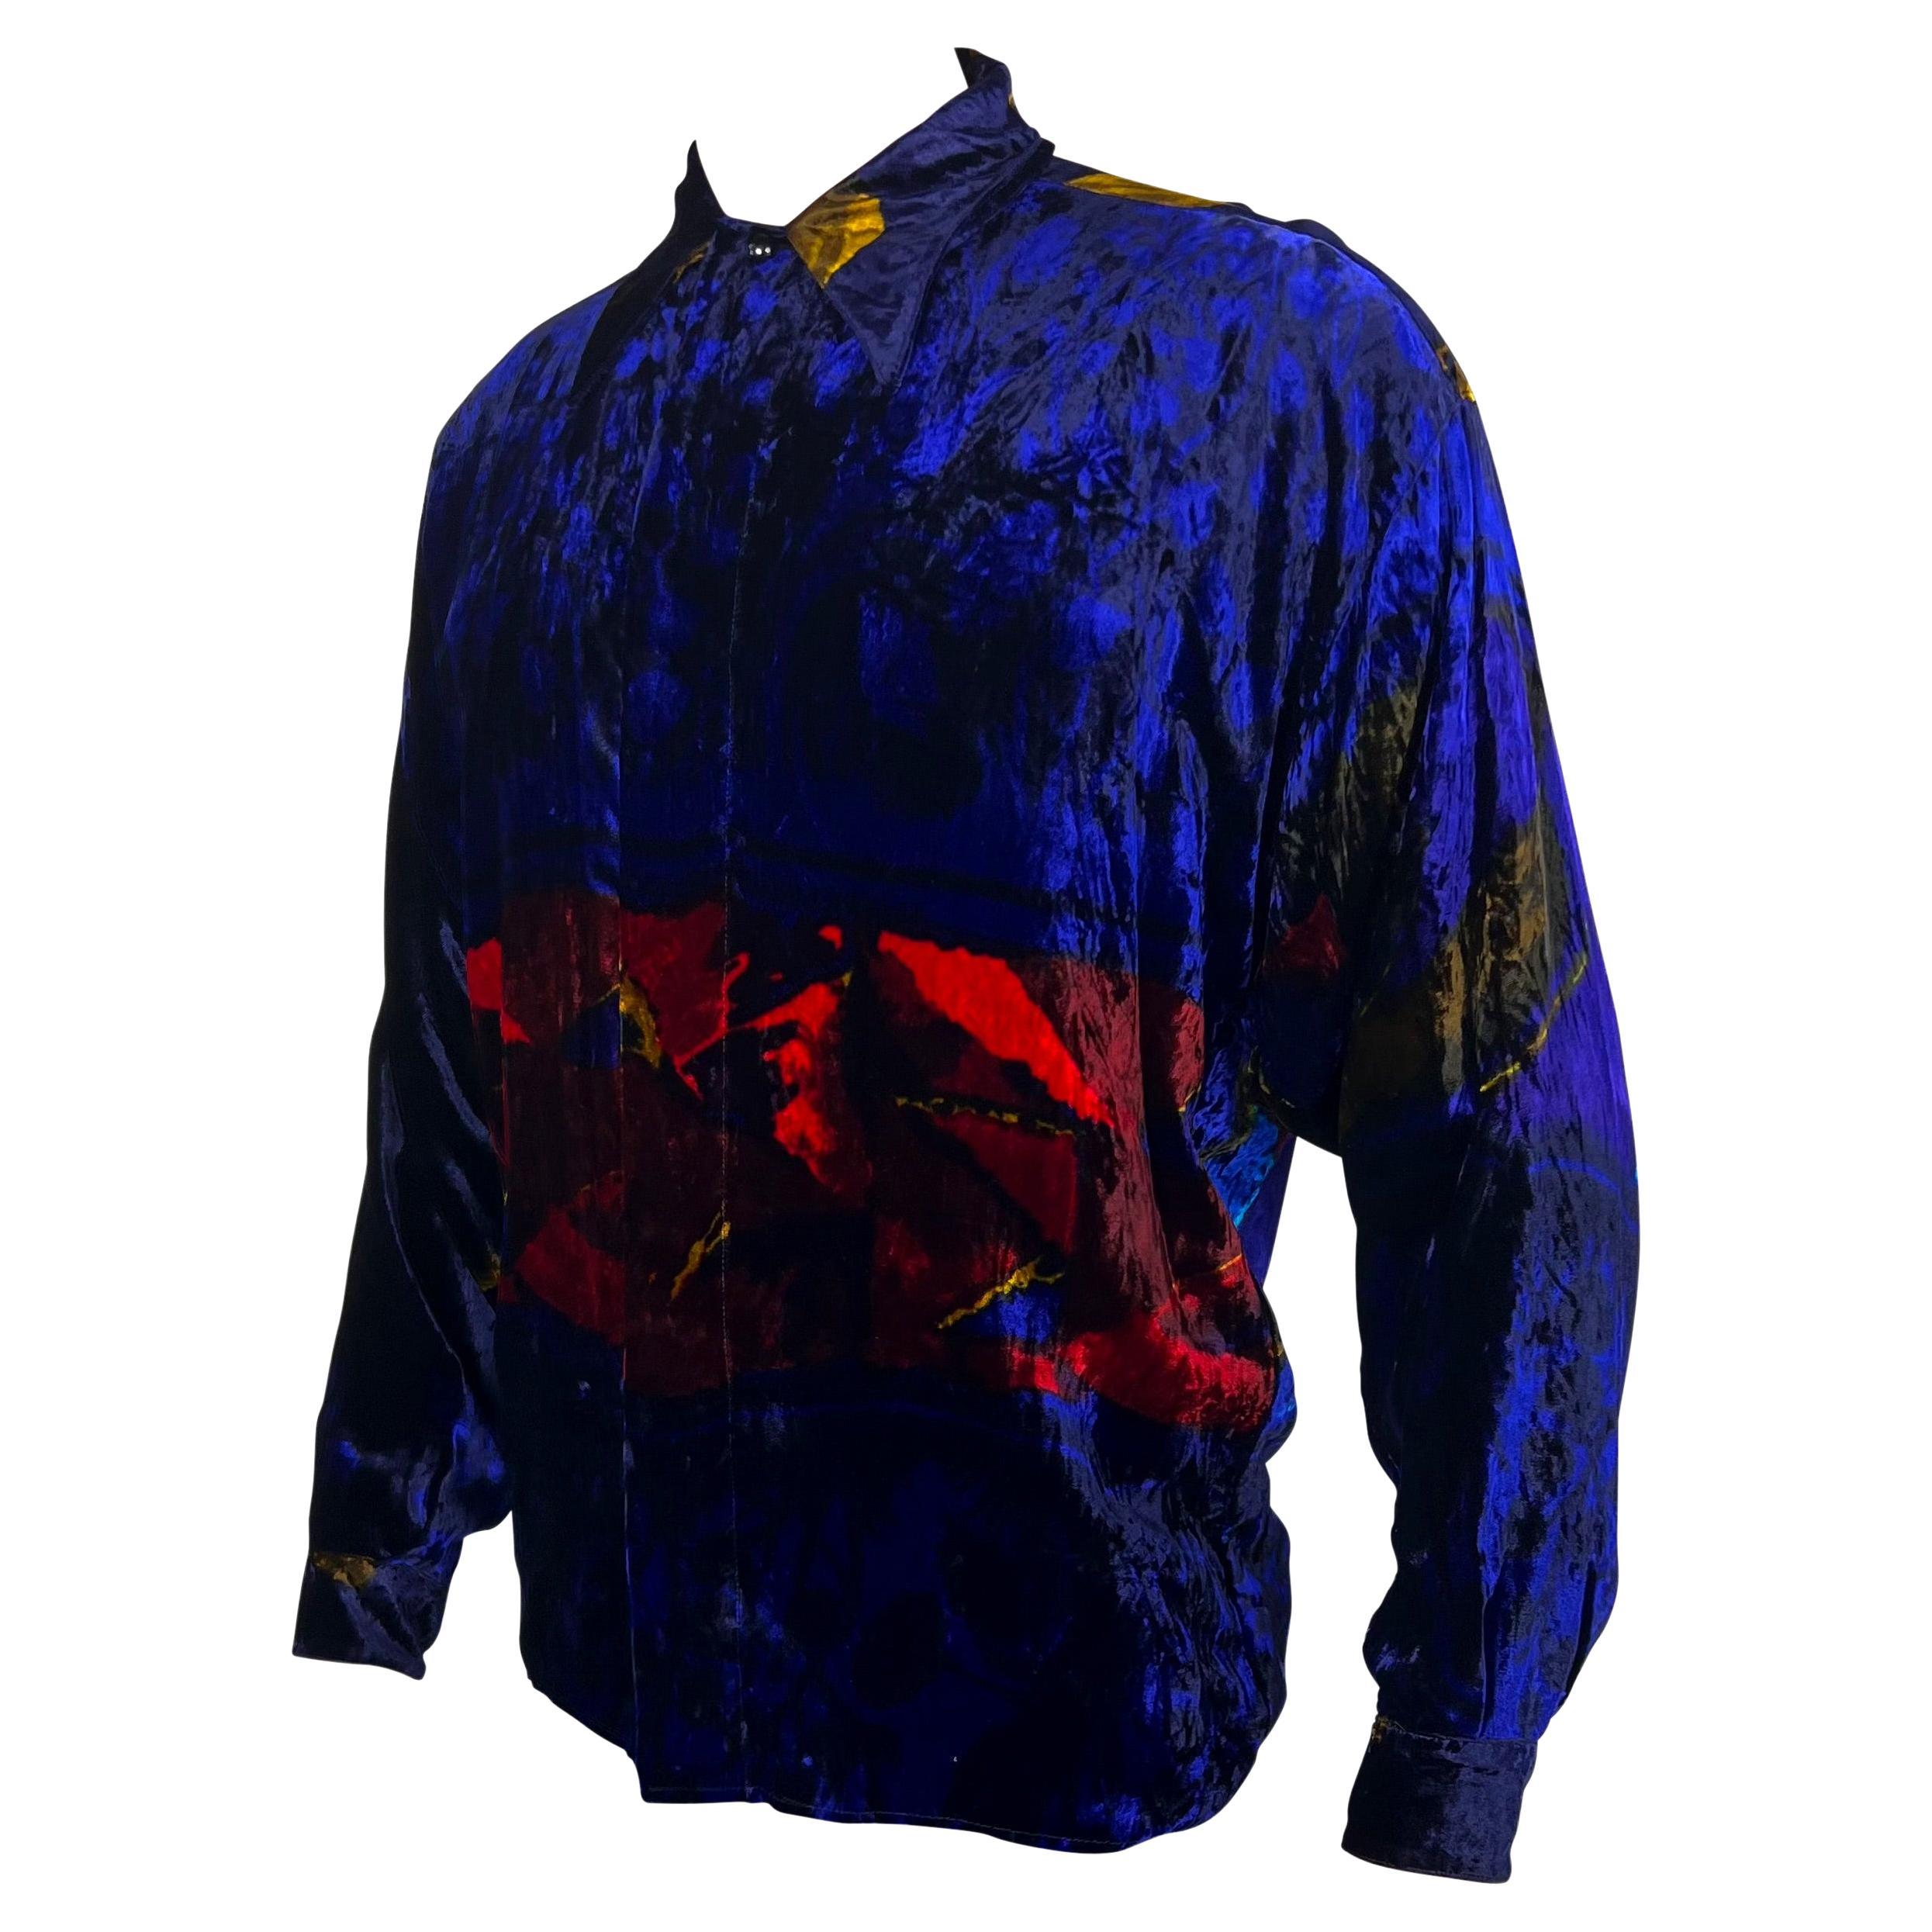 TheRealList presents: an incredible men's abstract velvet Gianni Versace shirt, designed by Gianni Versace. From the early 1990s, this amazing and soft shirt features a blue and red abstract print throughout. This bold shirt is made complete with a